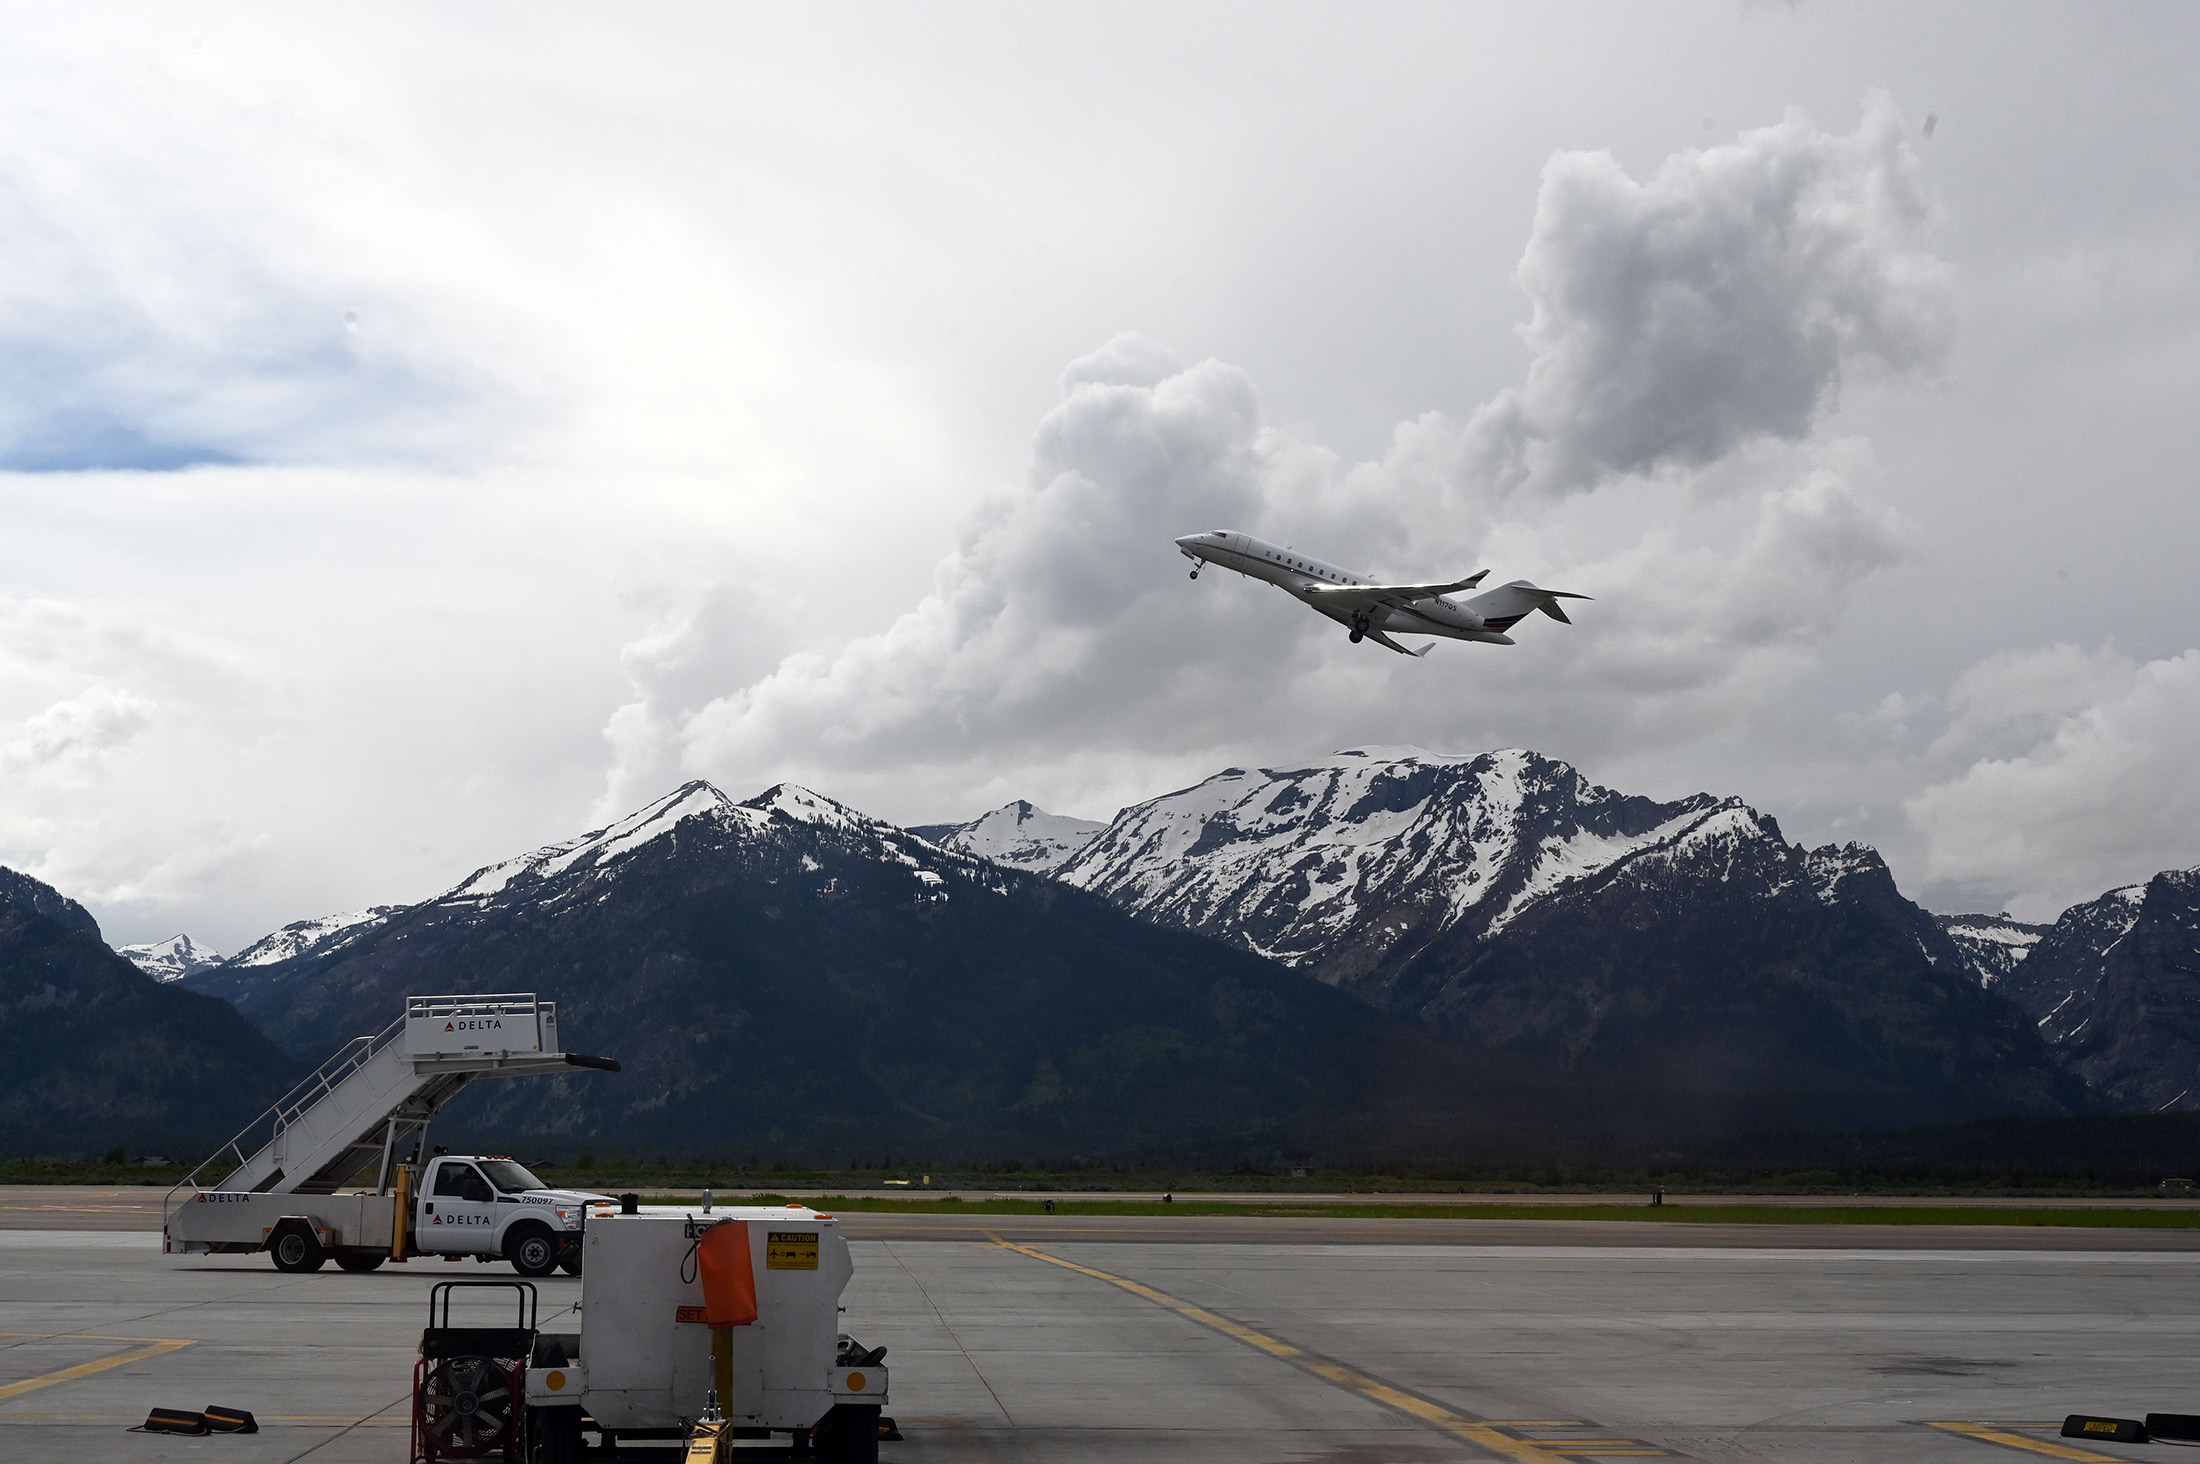 A private jet takes off from Jackson Hole Airport in Grand Teton National Park, Wyo., on June 13, 2019.